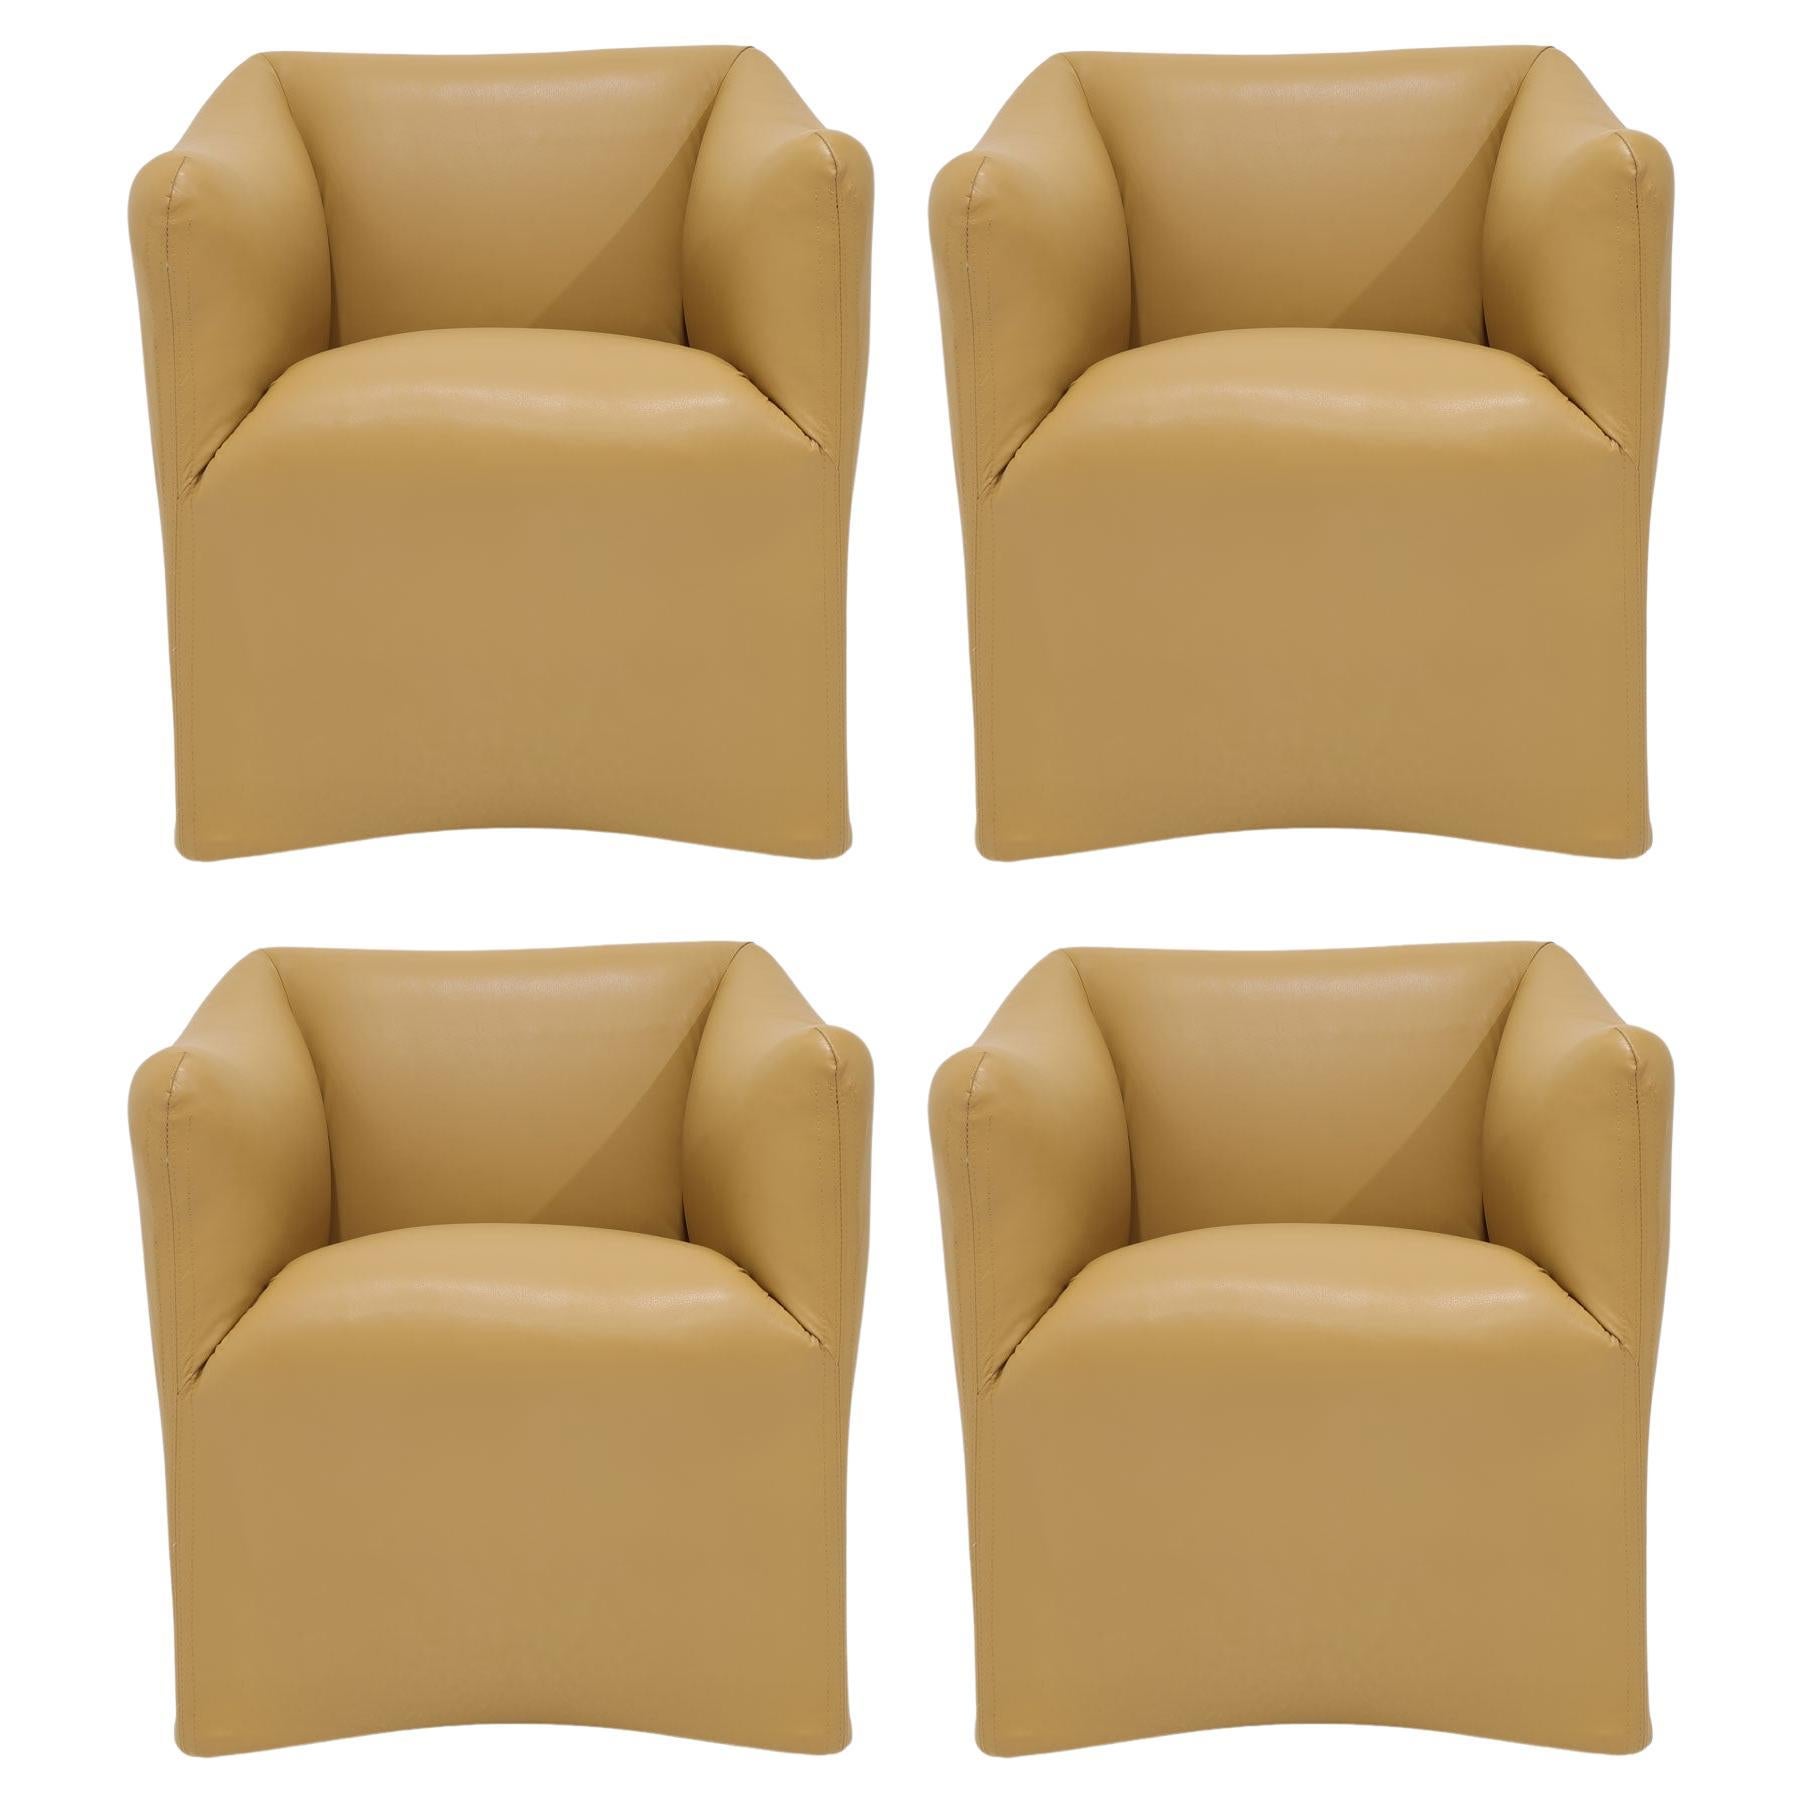 Mario Bellini Tentazione Armchair in Maharam Leather, Set of Four For Sale